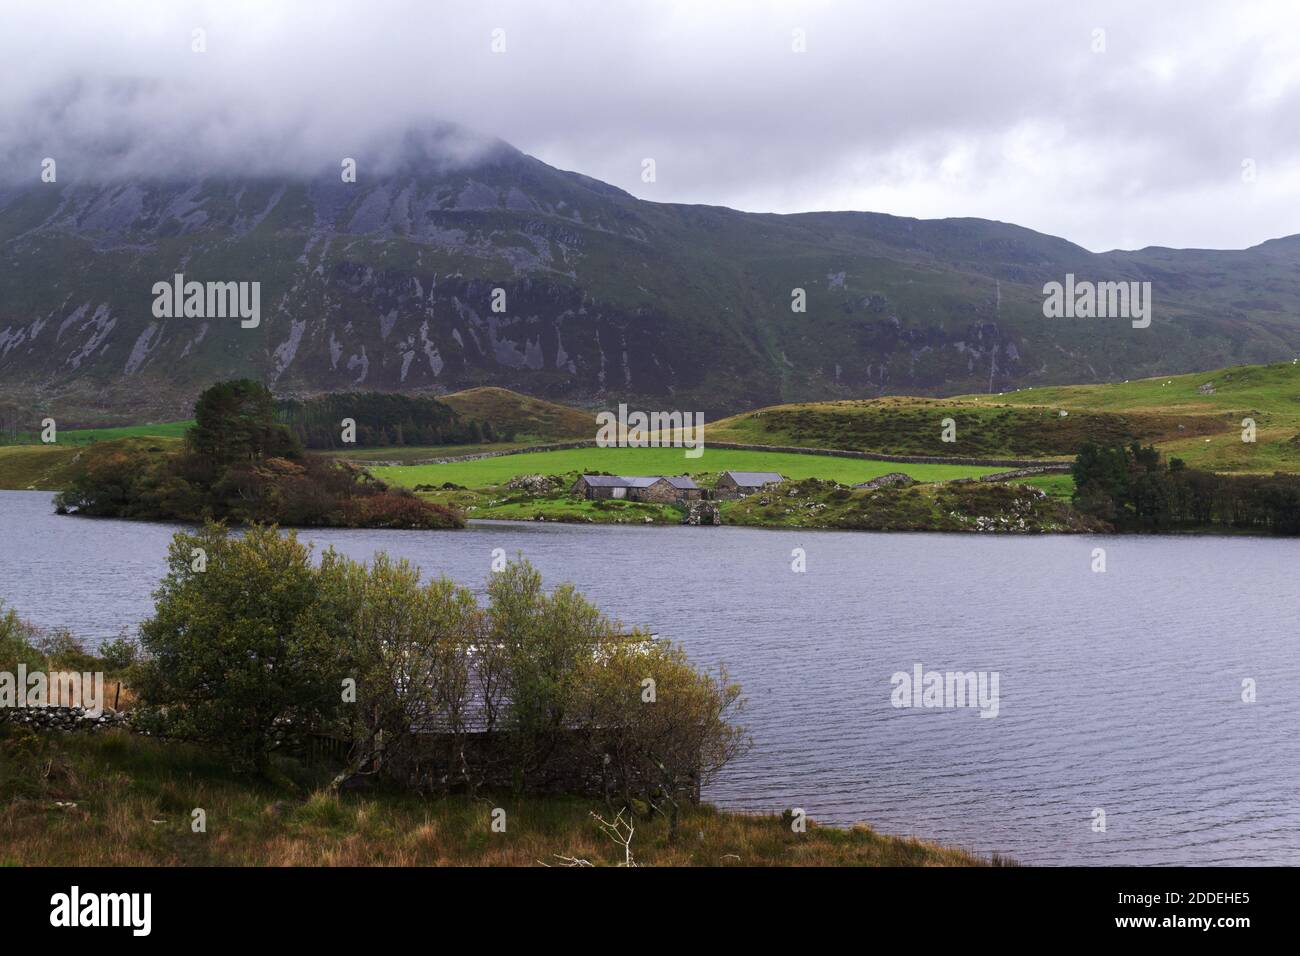 Lake Cregennan in Gwynedd, Wales, with the hills behind in the clouds and some stone farm buildings Stock Photo